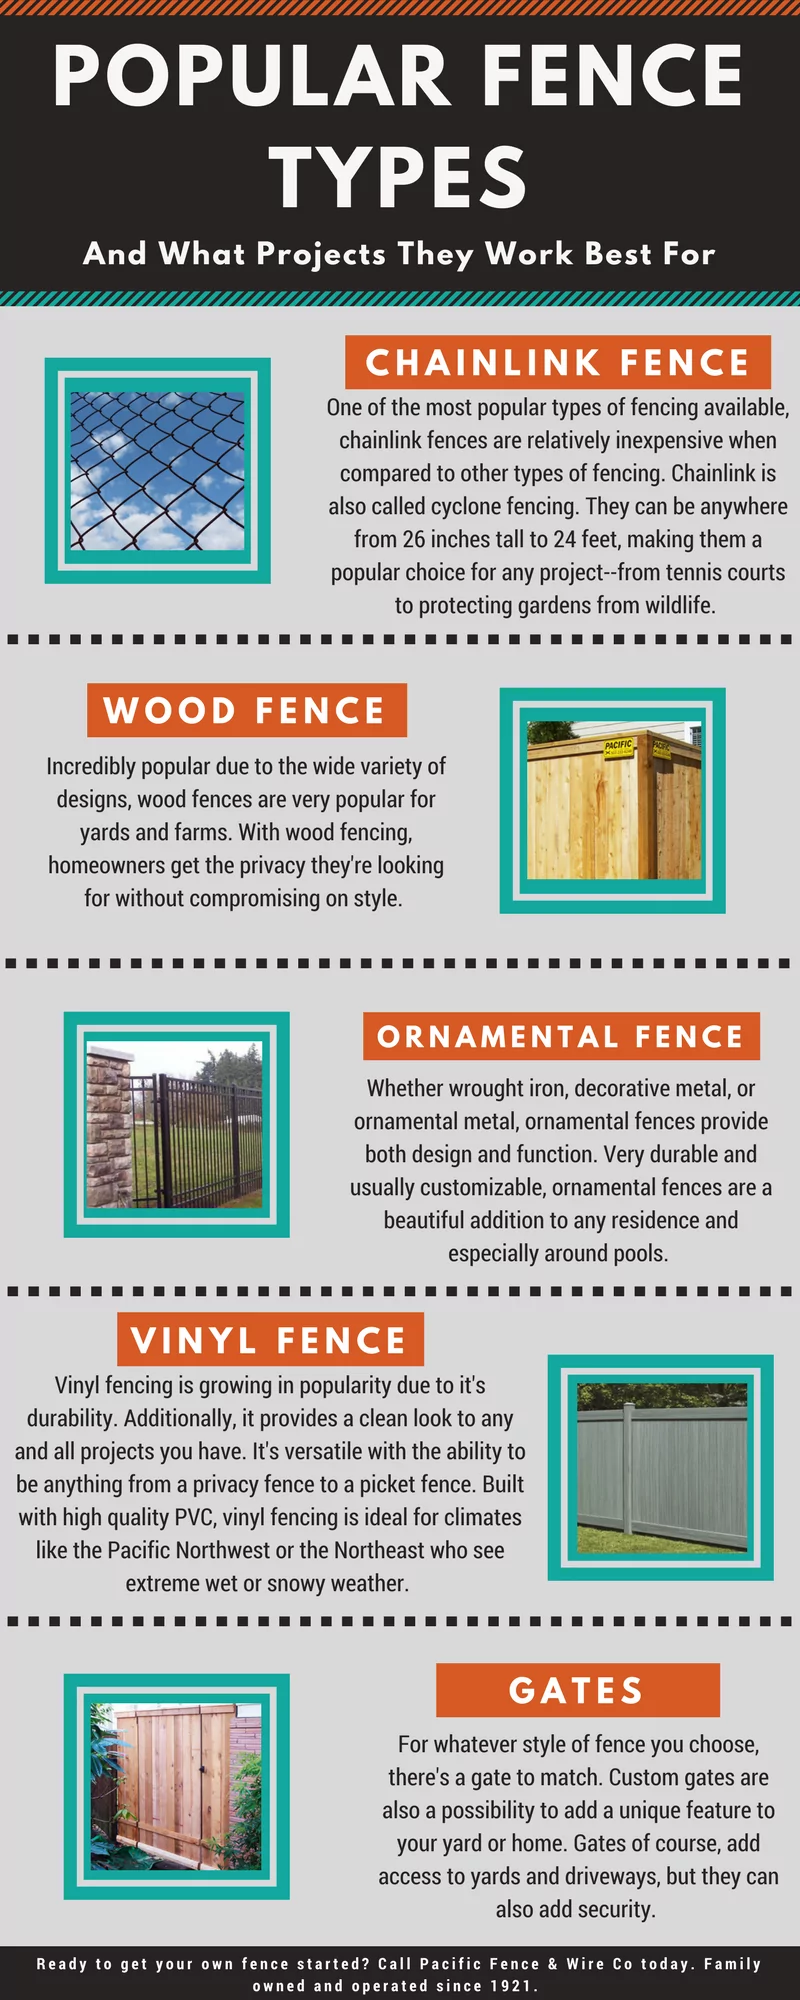 Popular Fences for the Pacific Northwest